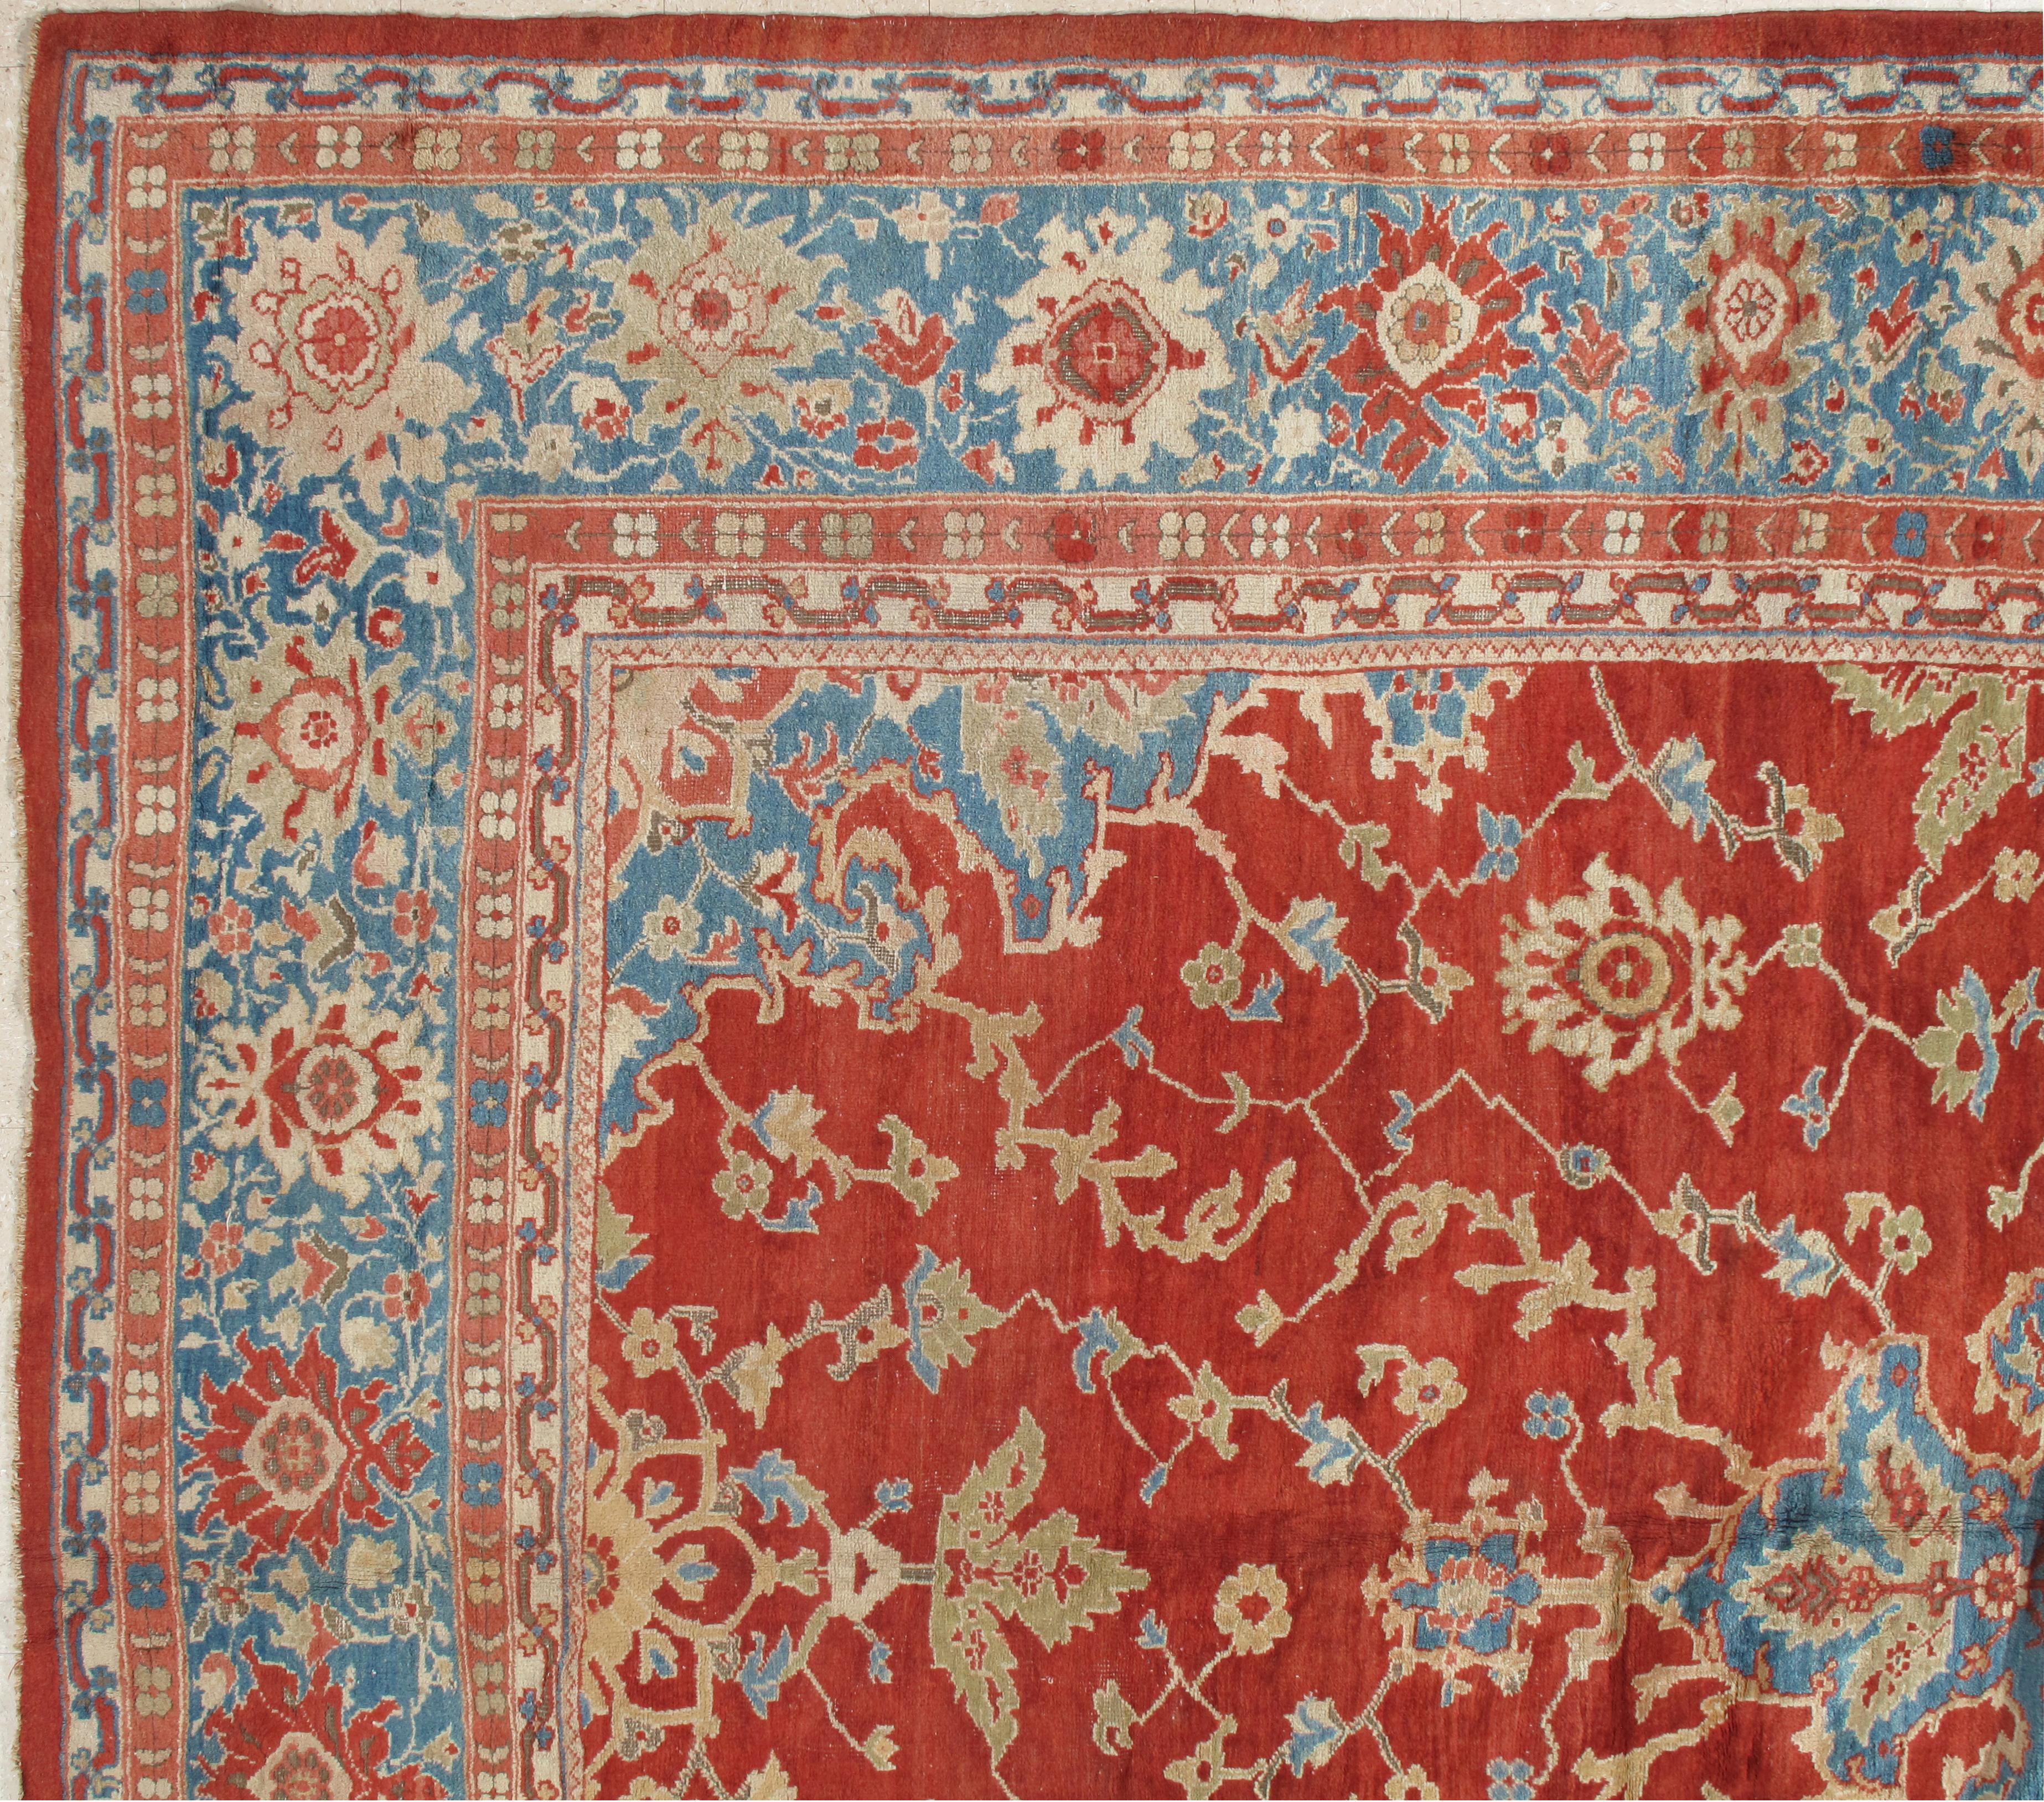 Sultanabad is a region in NW Persia. It was the site of the principle Ziegler weavings in the late 19th century. Sultanabad's are famous for their floral designs as they improved the quality and designs to match the European taste. Adapting the